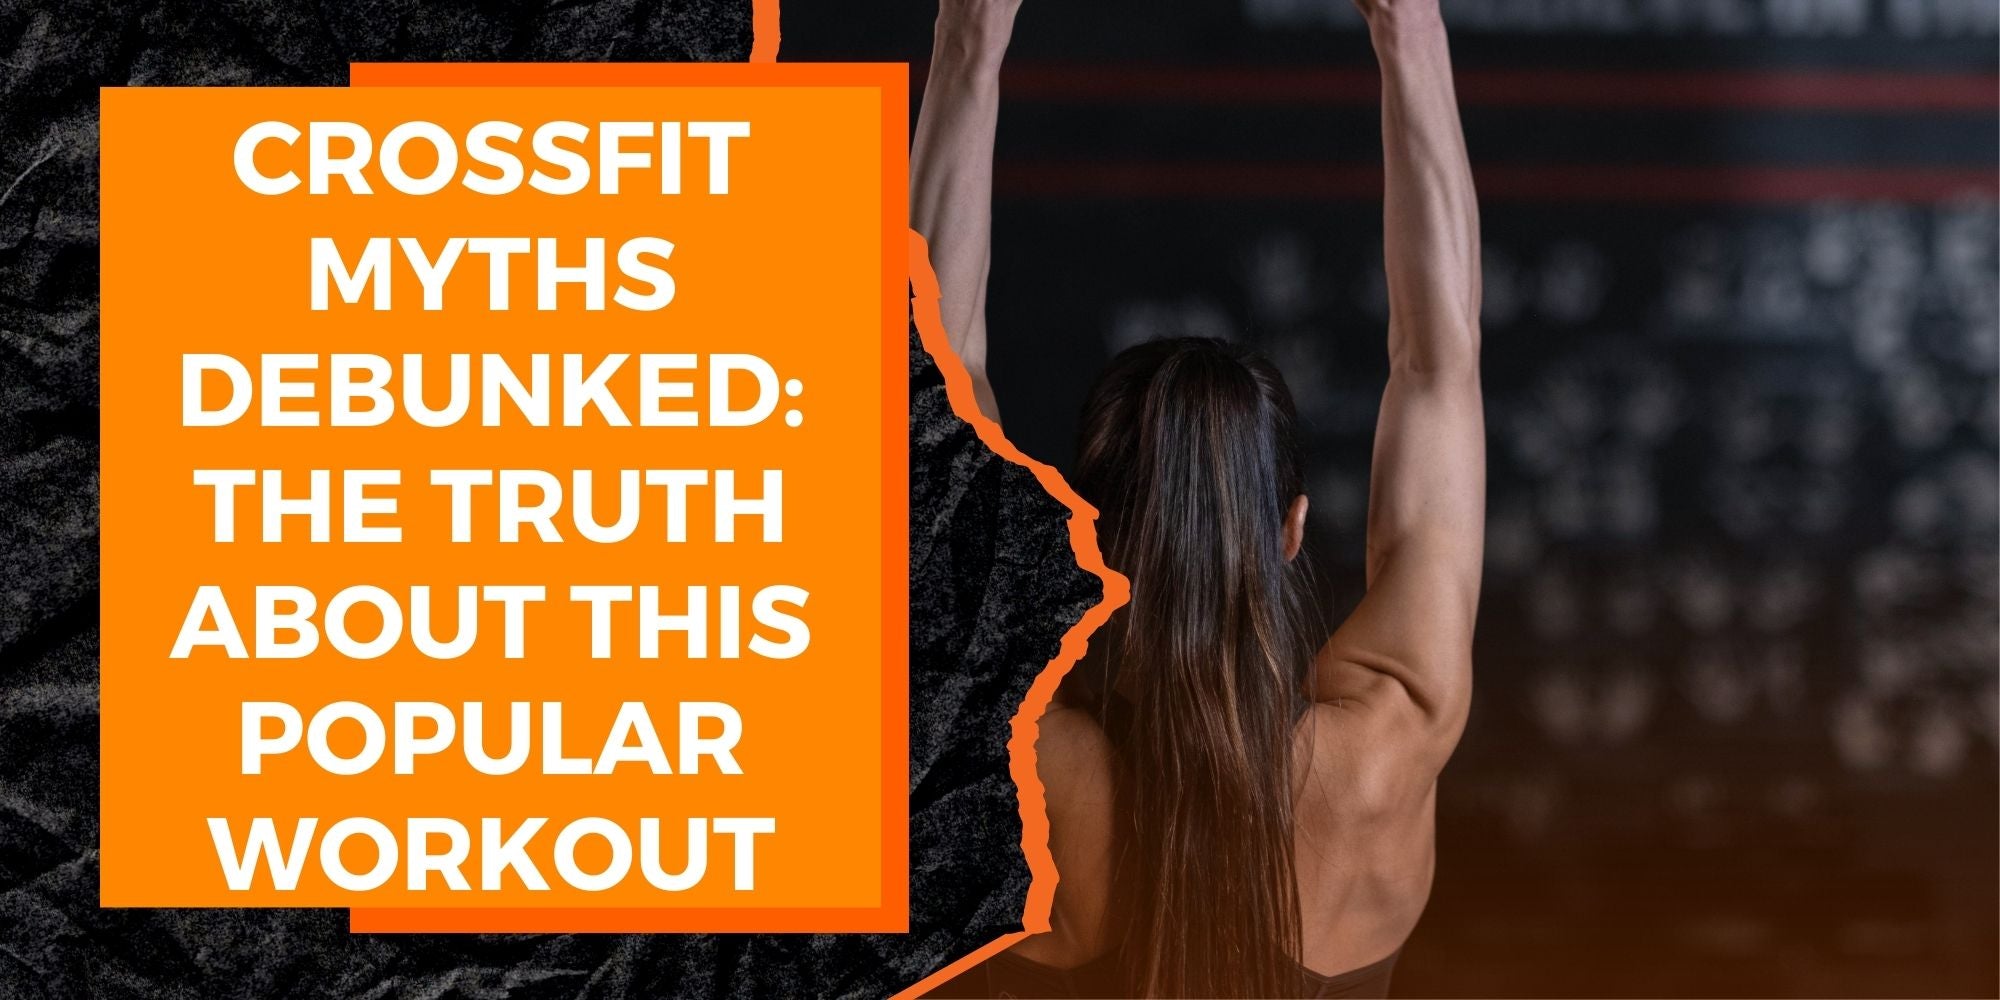 CrossFit Myths Debunked: The Truth About This Popular Workout